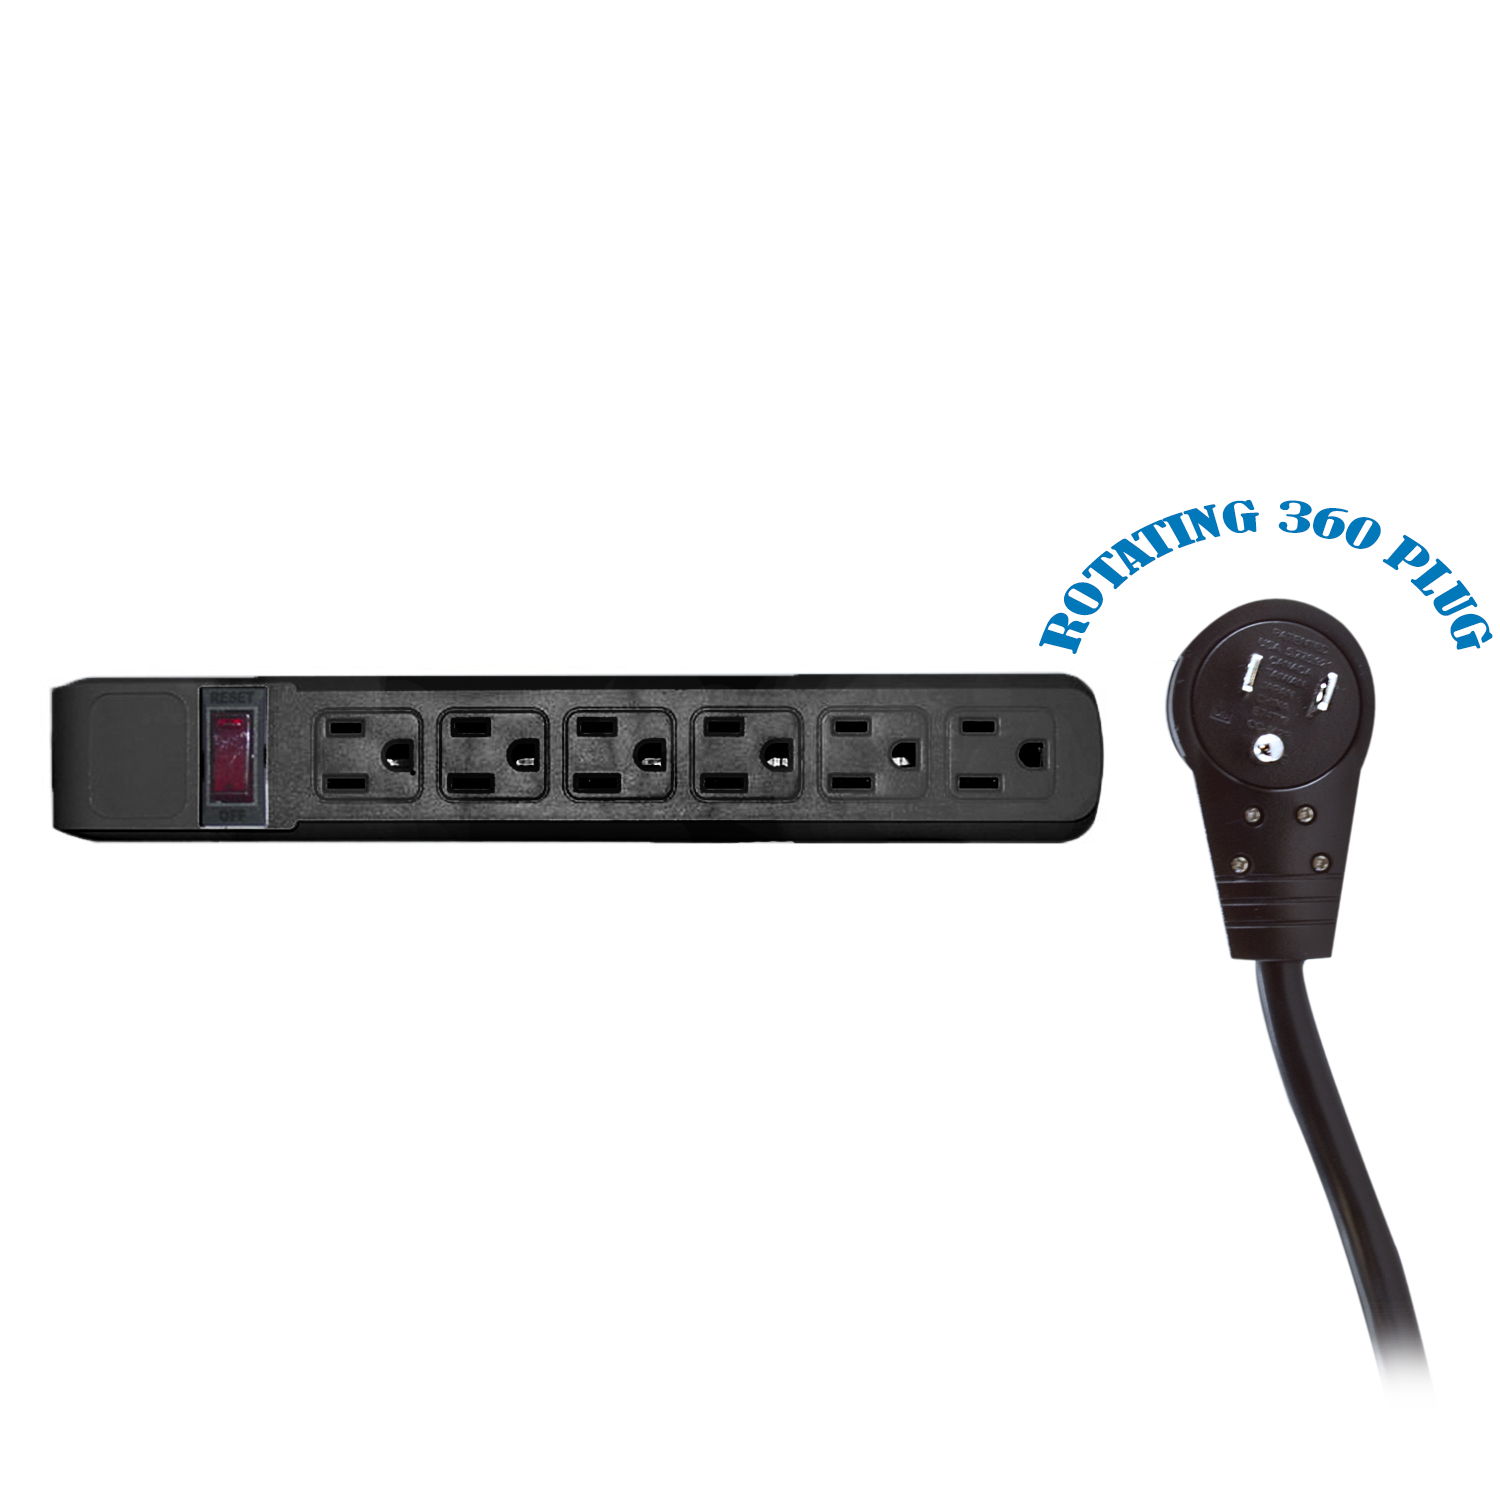 Surge Protector, Flat Rotating Plug, 6 Outlet, Black 10 FT CORD